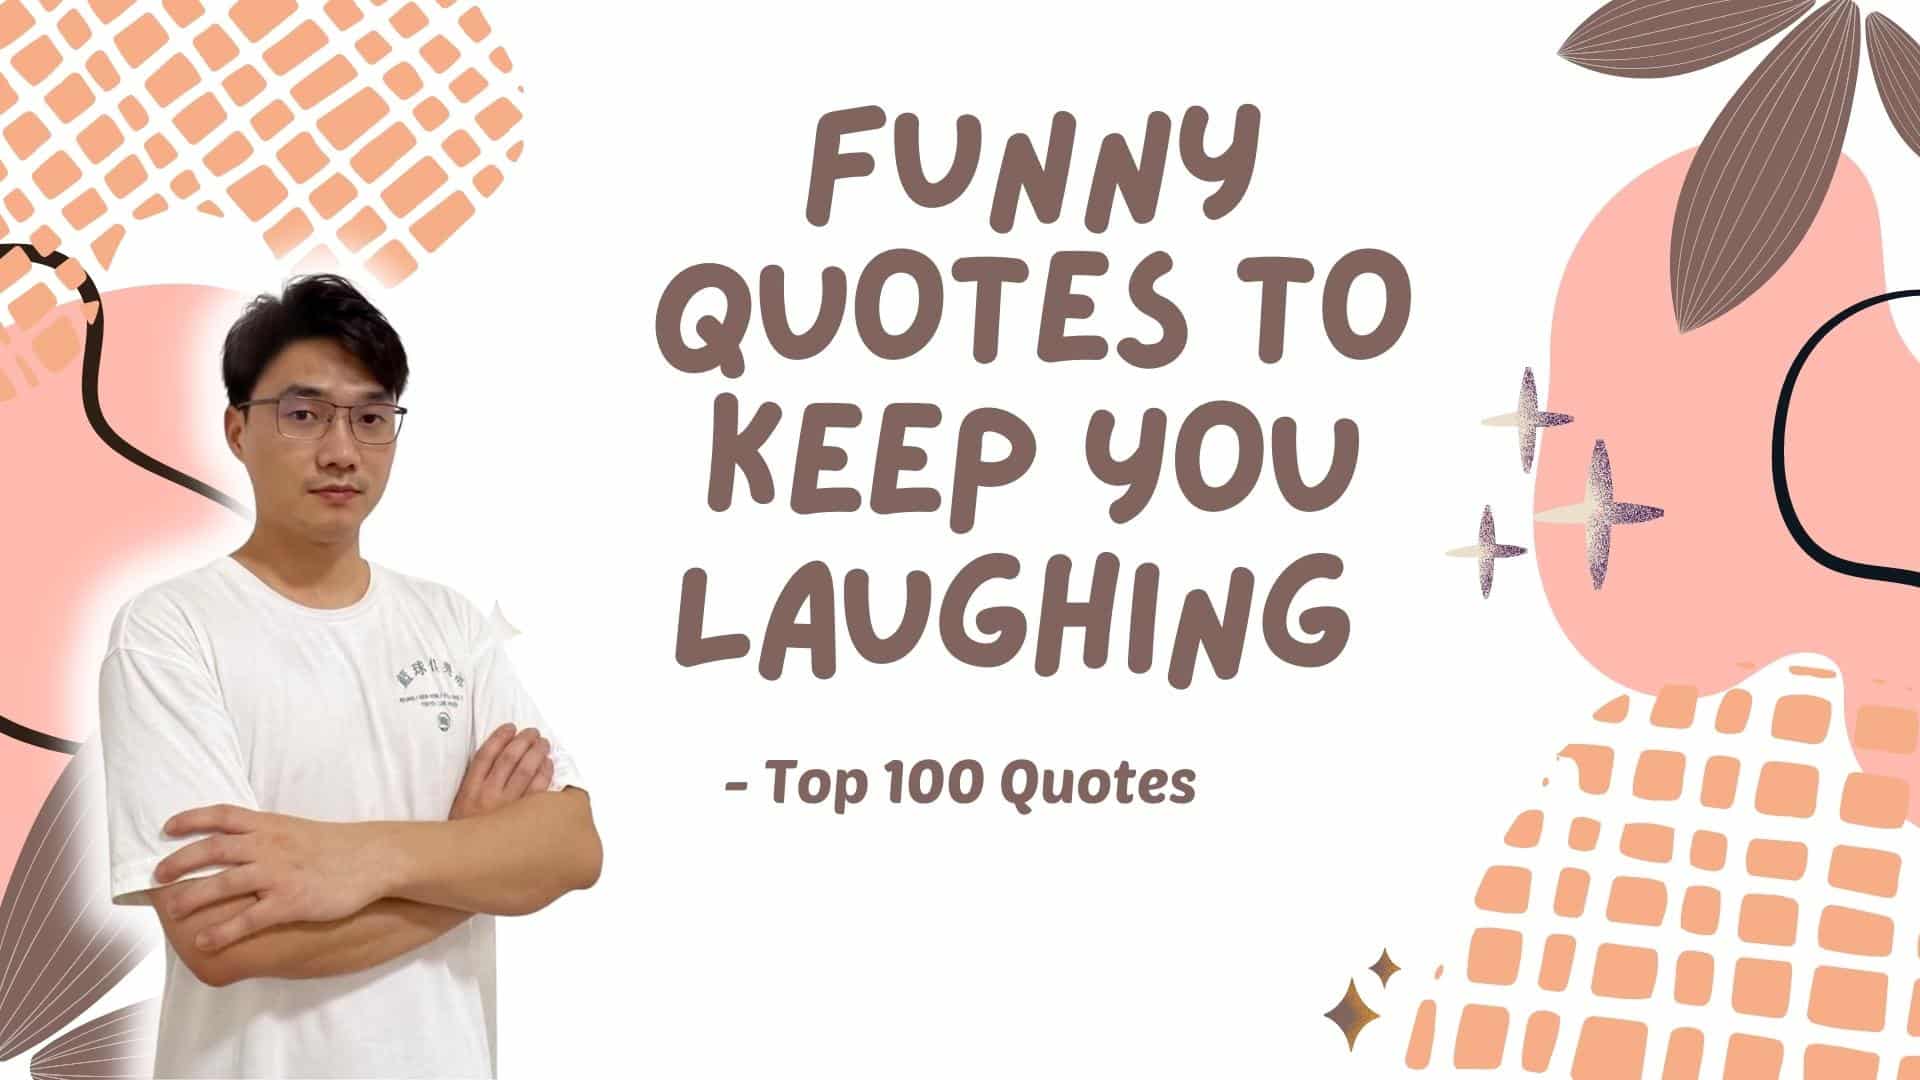 Funny Quotes to Keep You Laughing - Top 100 Quotes | Keeswan